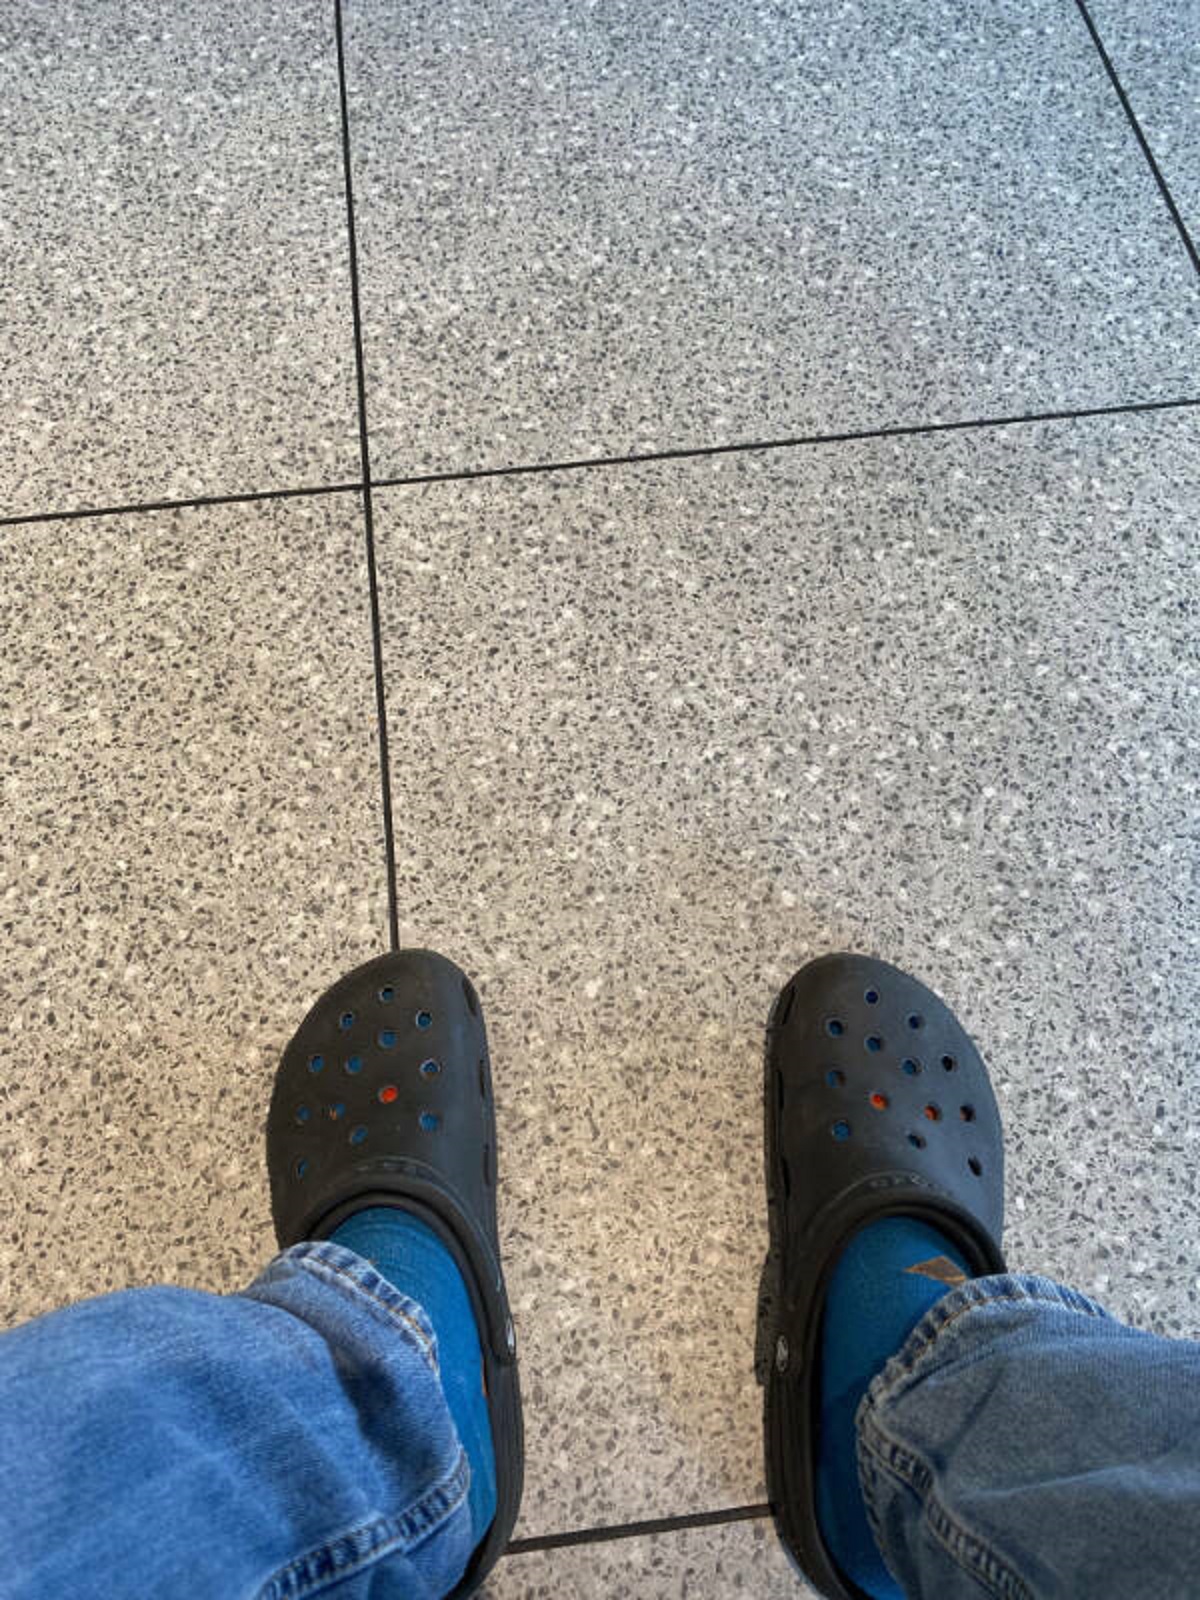 “4 hours into a 13 hour road trip to my families 3 week vacation of the year and I just realized that in the rush to leave I forgot to bring any other shoes with me.”